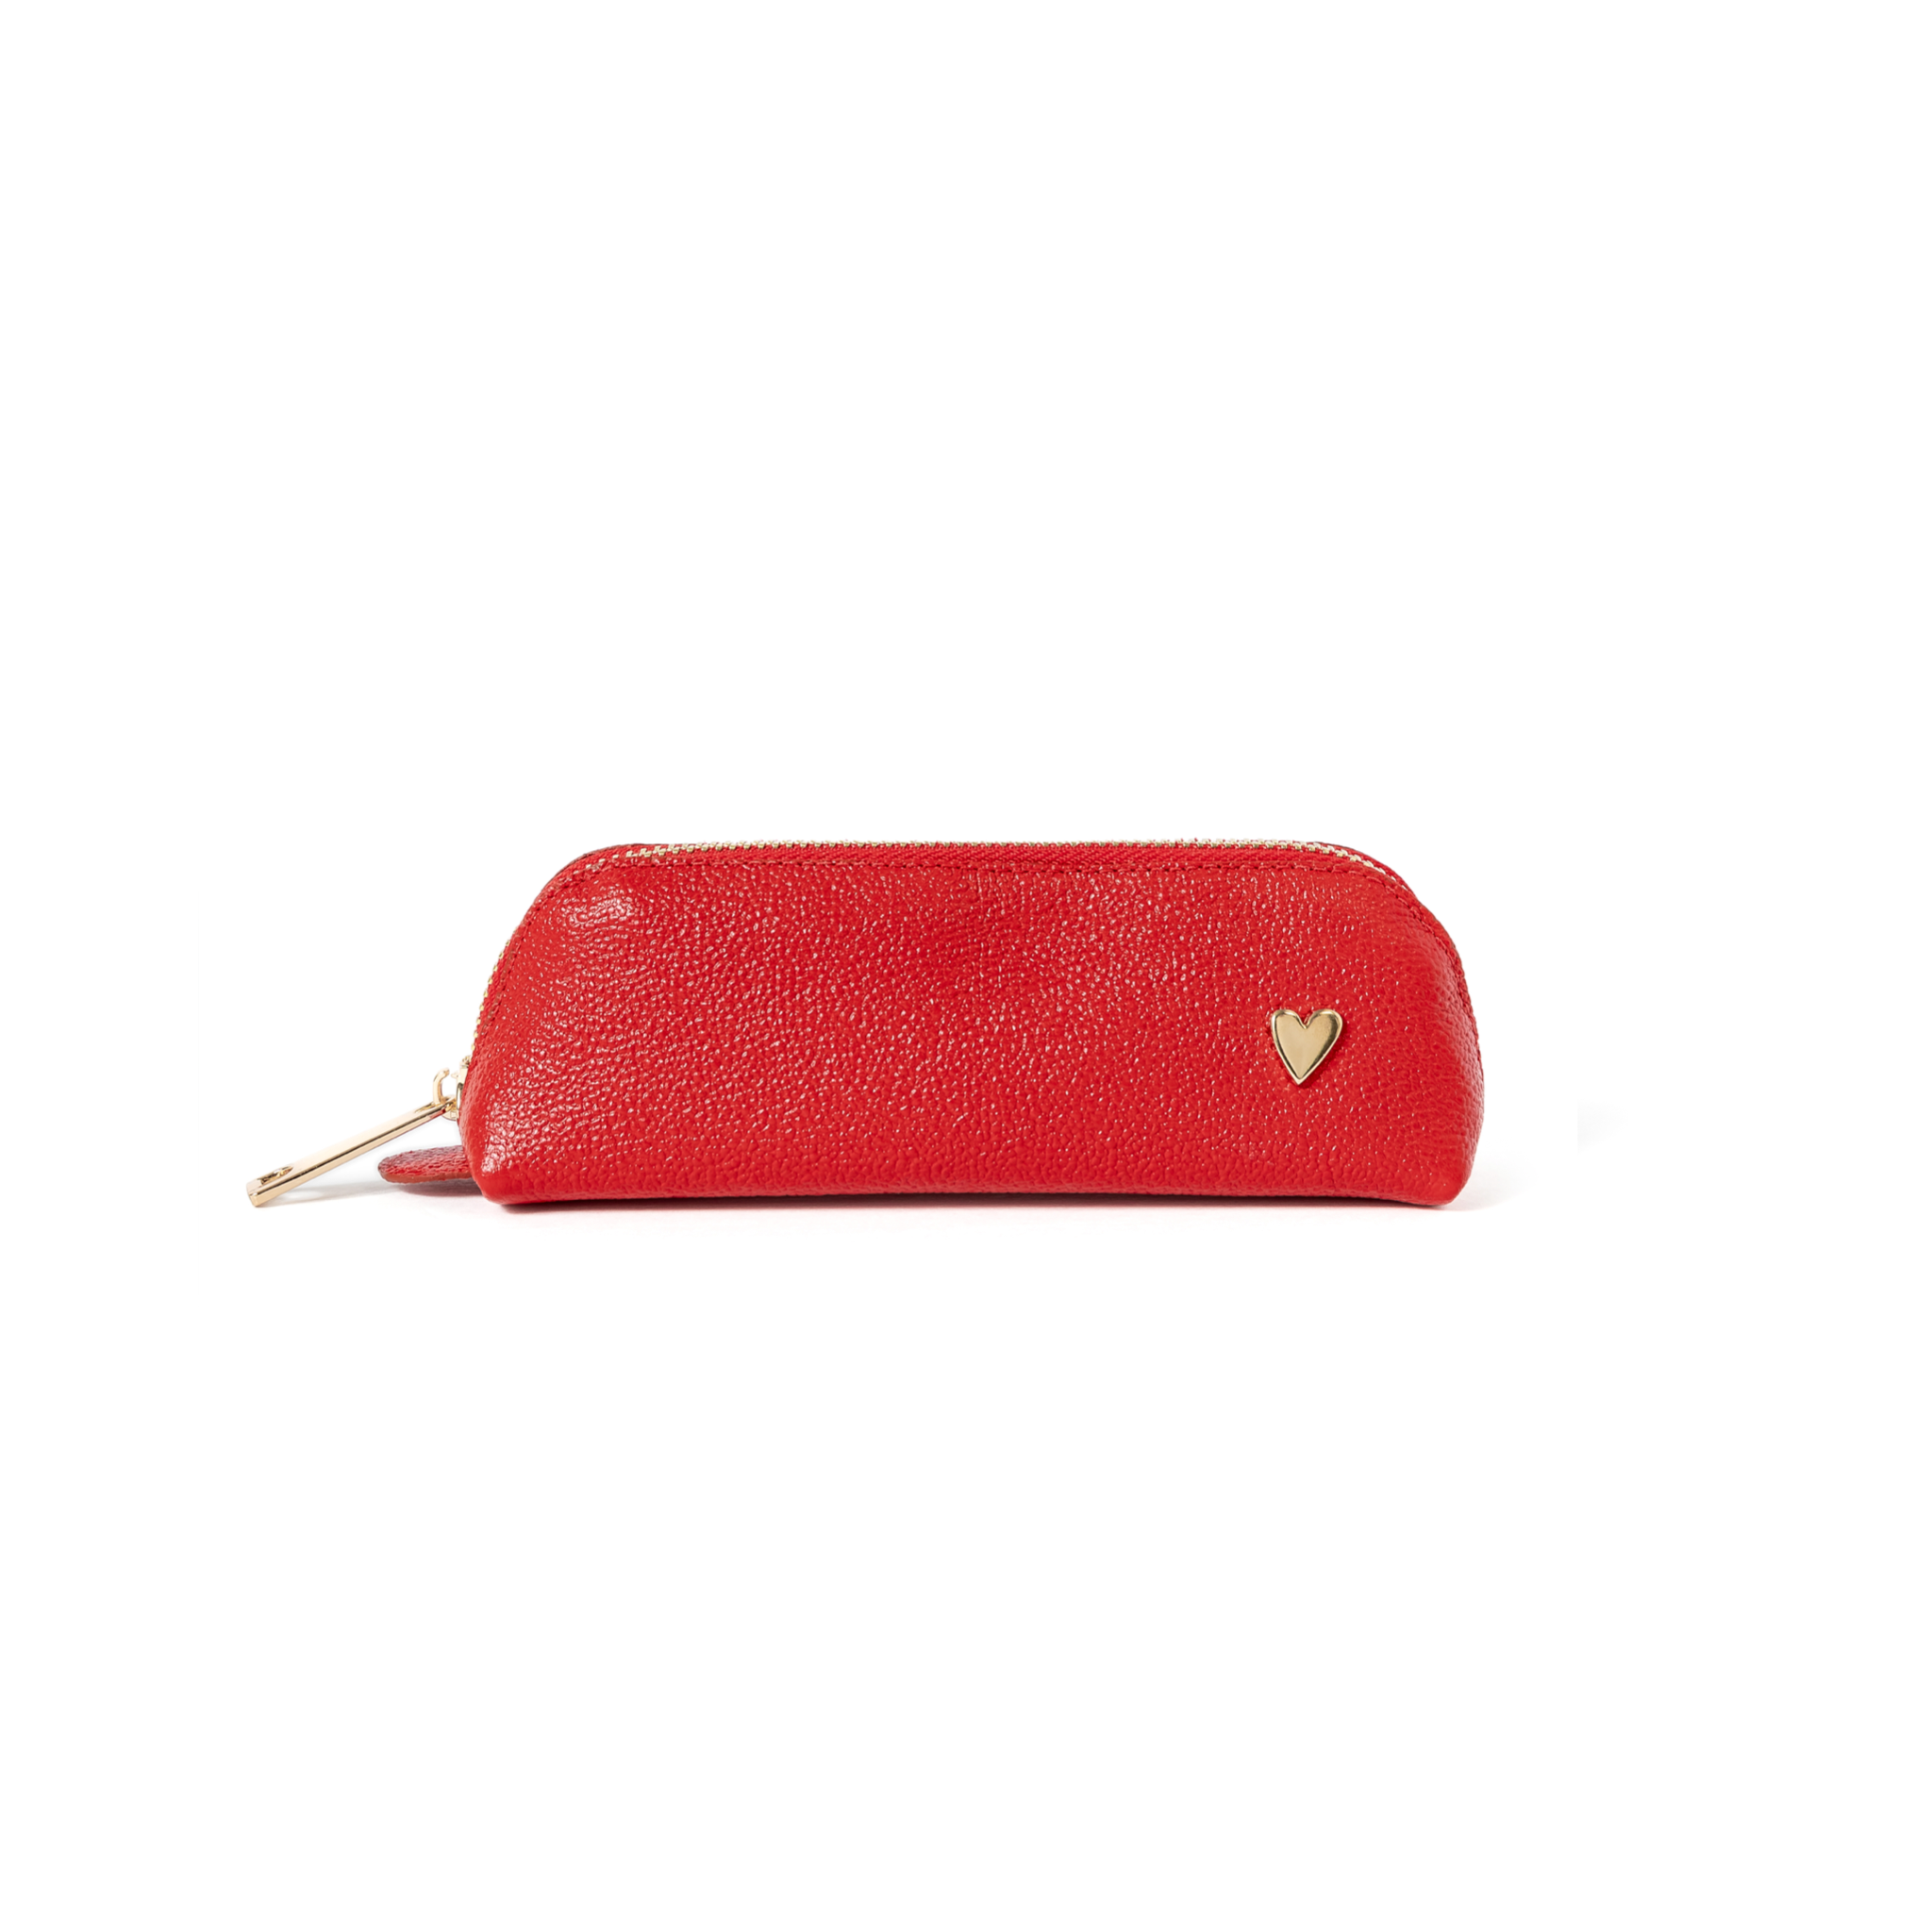 Pencil Case - Red by Nataly Mendez, El portalapices no incluye los marcadores mostrados en la imagen. Genuine Leather Signature Heart Fits about 15 pencils or pens Designed to stand in their own 2" H, 6.5" W, 2" D